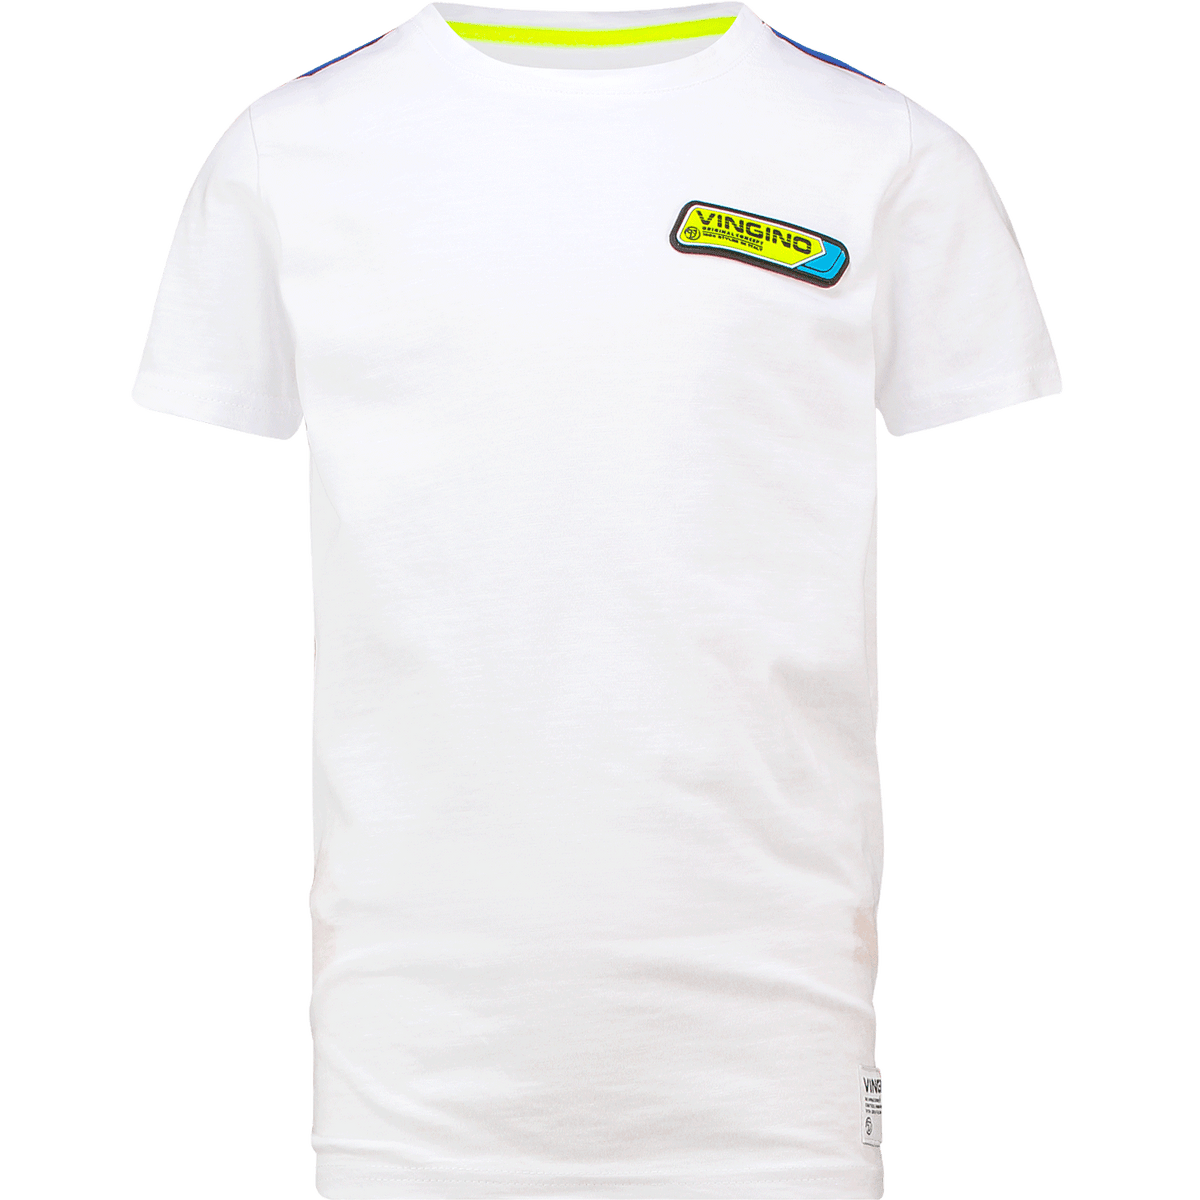 Jungen T-Shirt Hanly Real White